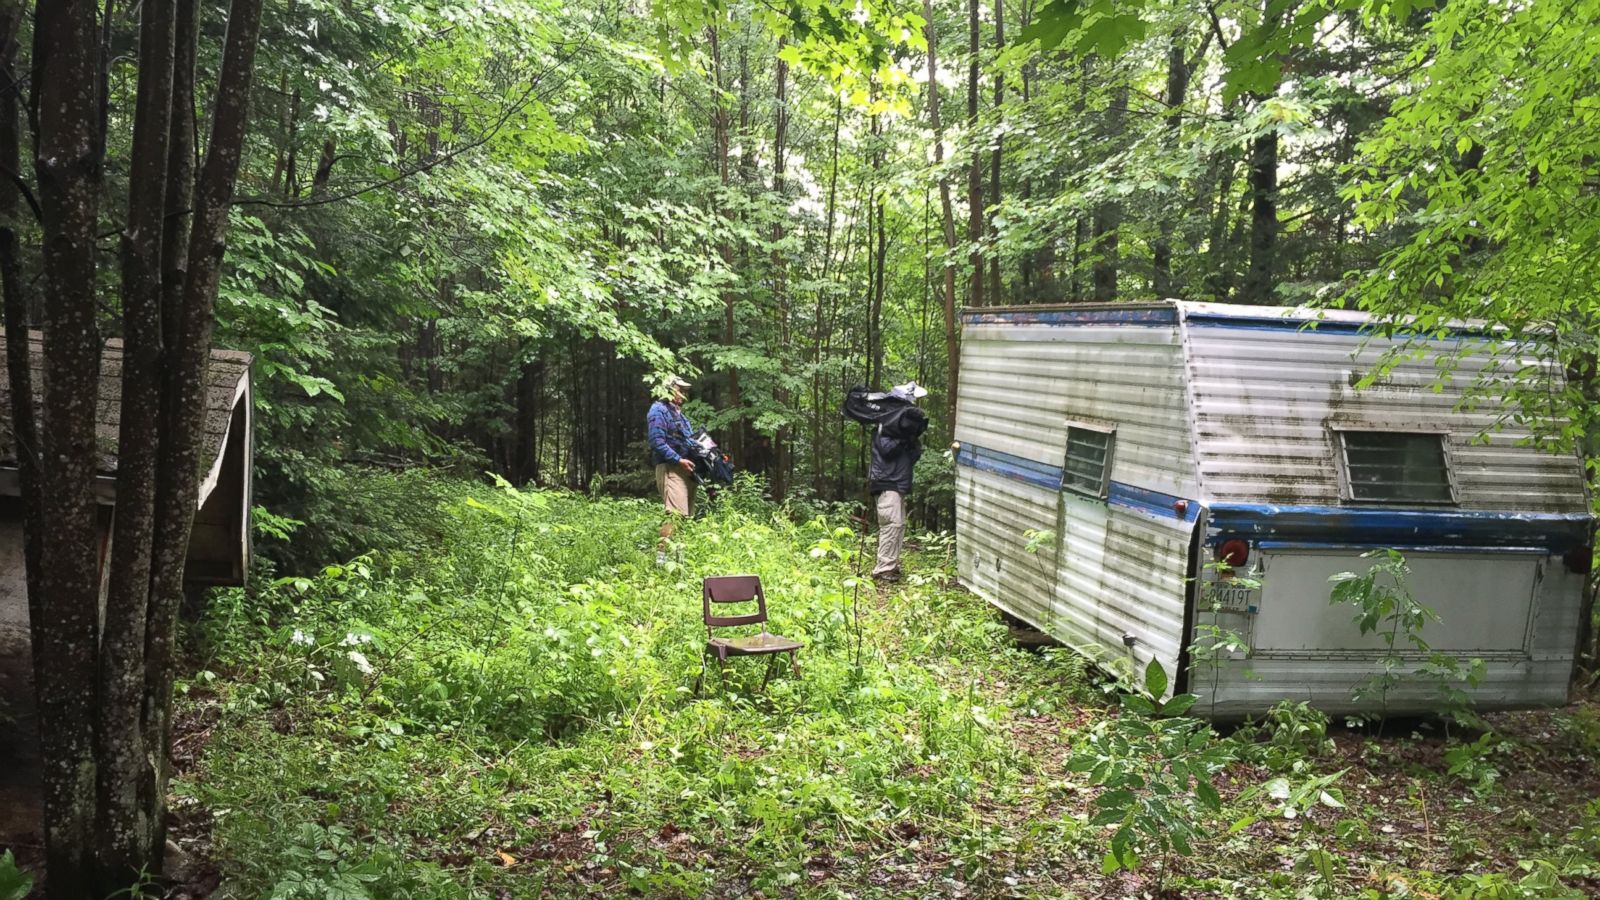 Richard Matt and David Sweat, Convicted Murderers Who Escaped Prison, Have  Grisly Past